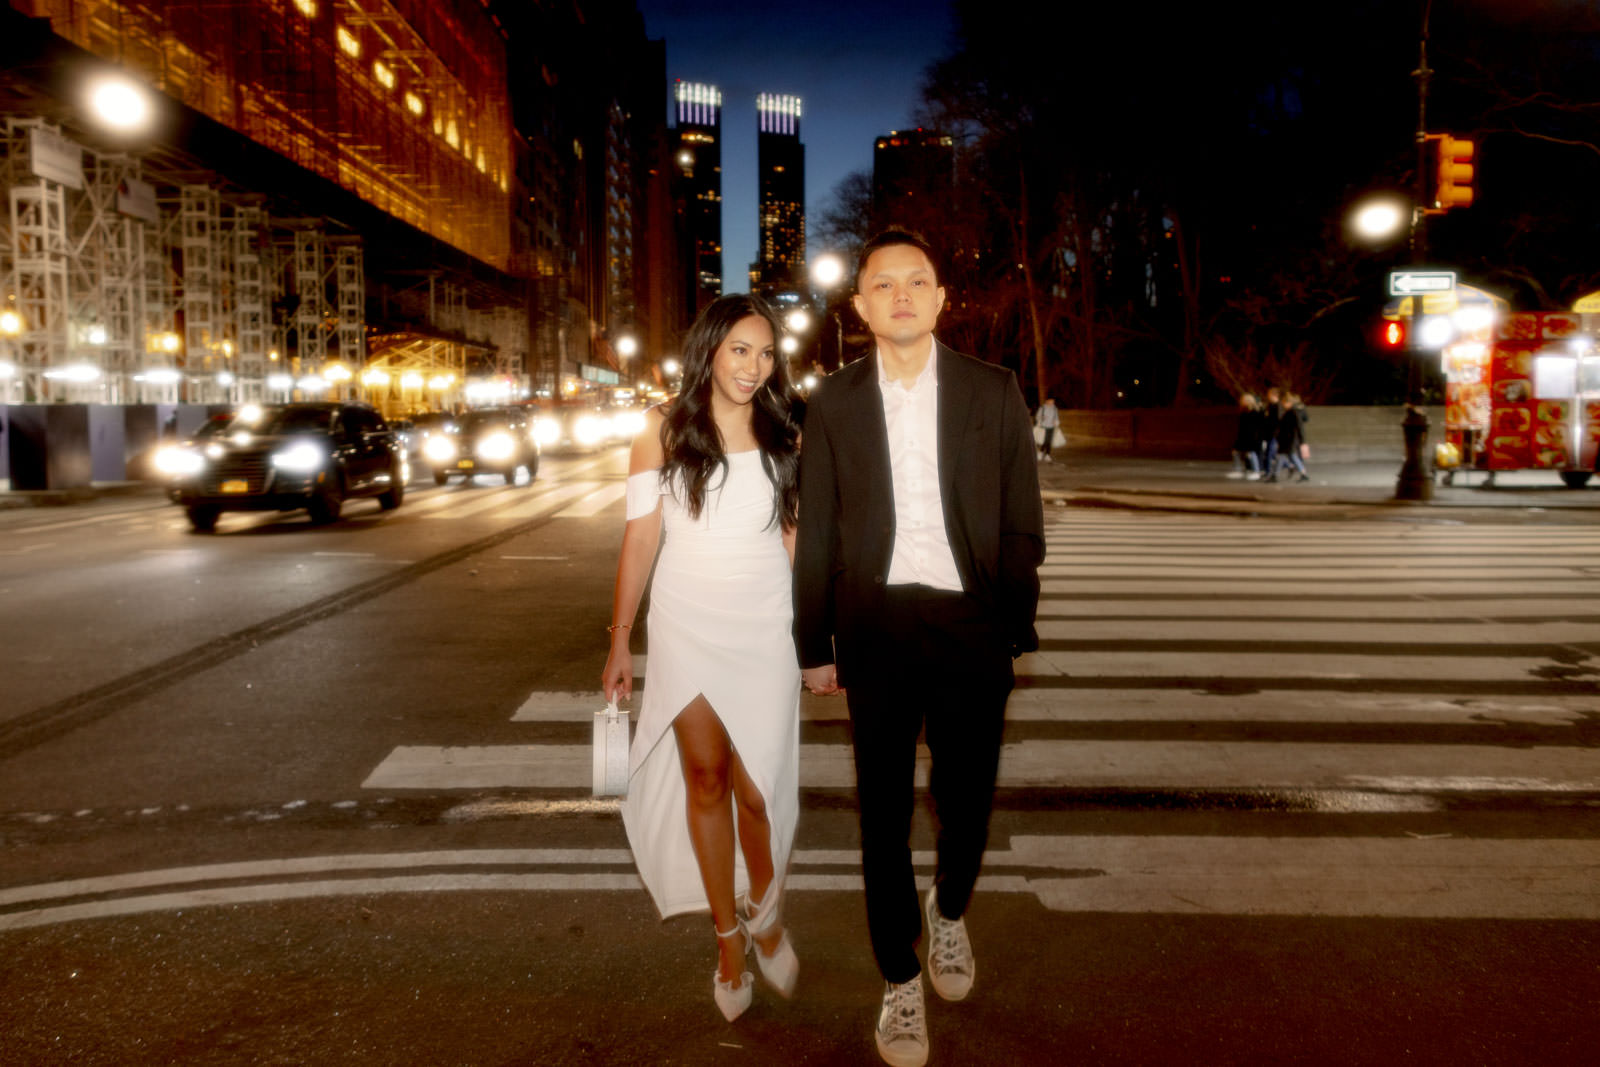 The engaged couple just crossed the street in New York City. Night engagement photos by Jenny Fu Studio